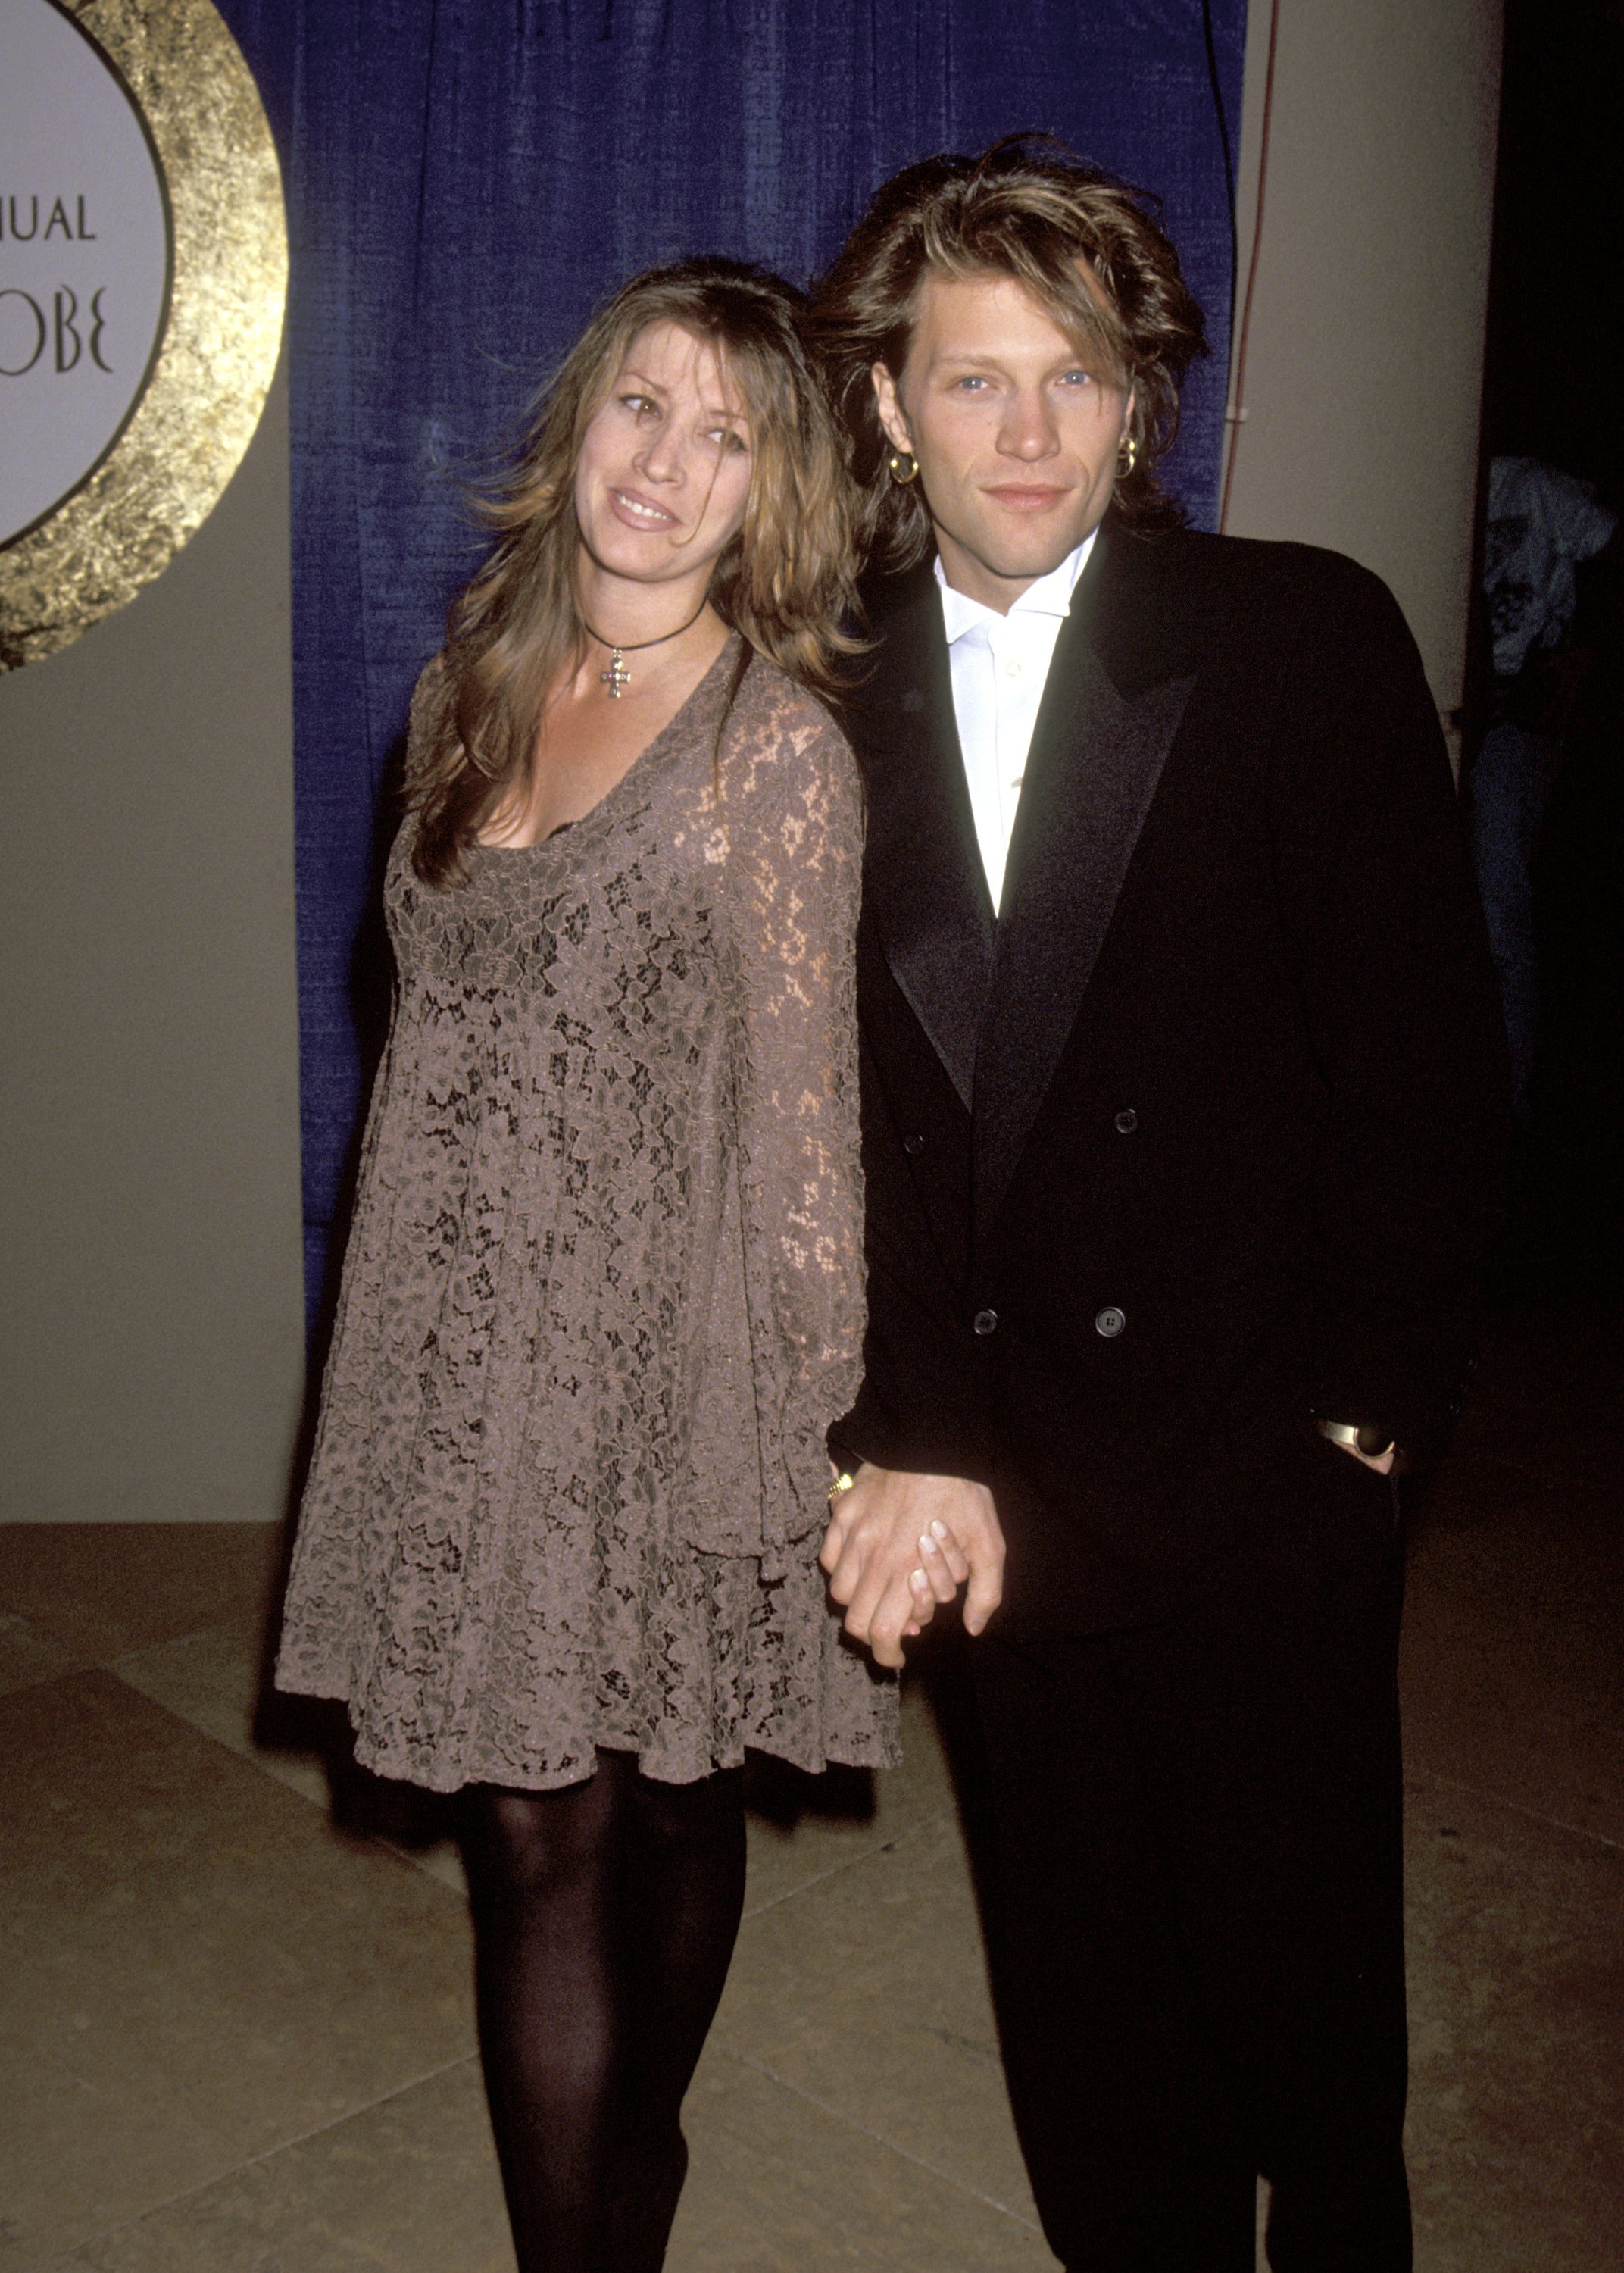 Singer Jon Bon Jovi and his wife kate instructor Dorothea Hurley attend the 50th Annual Golden Globe Awards on January 23, 1993 | Source: Getty Images